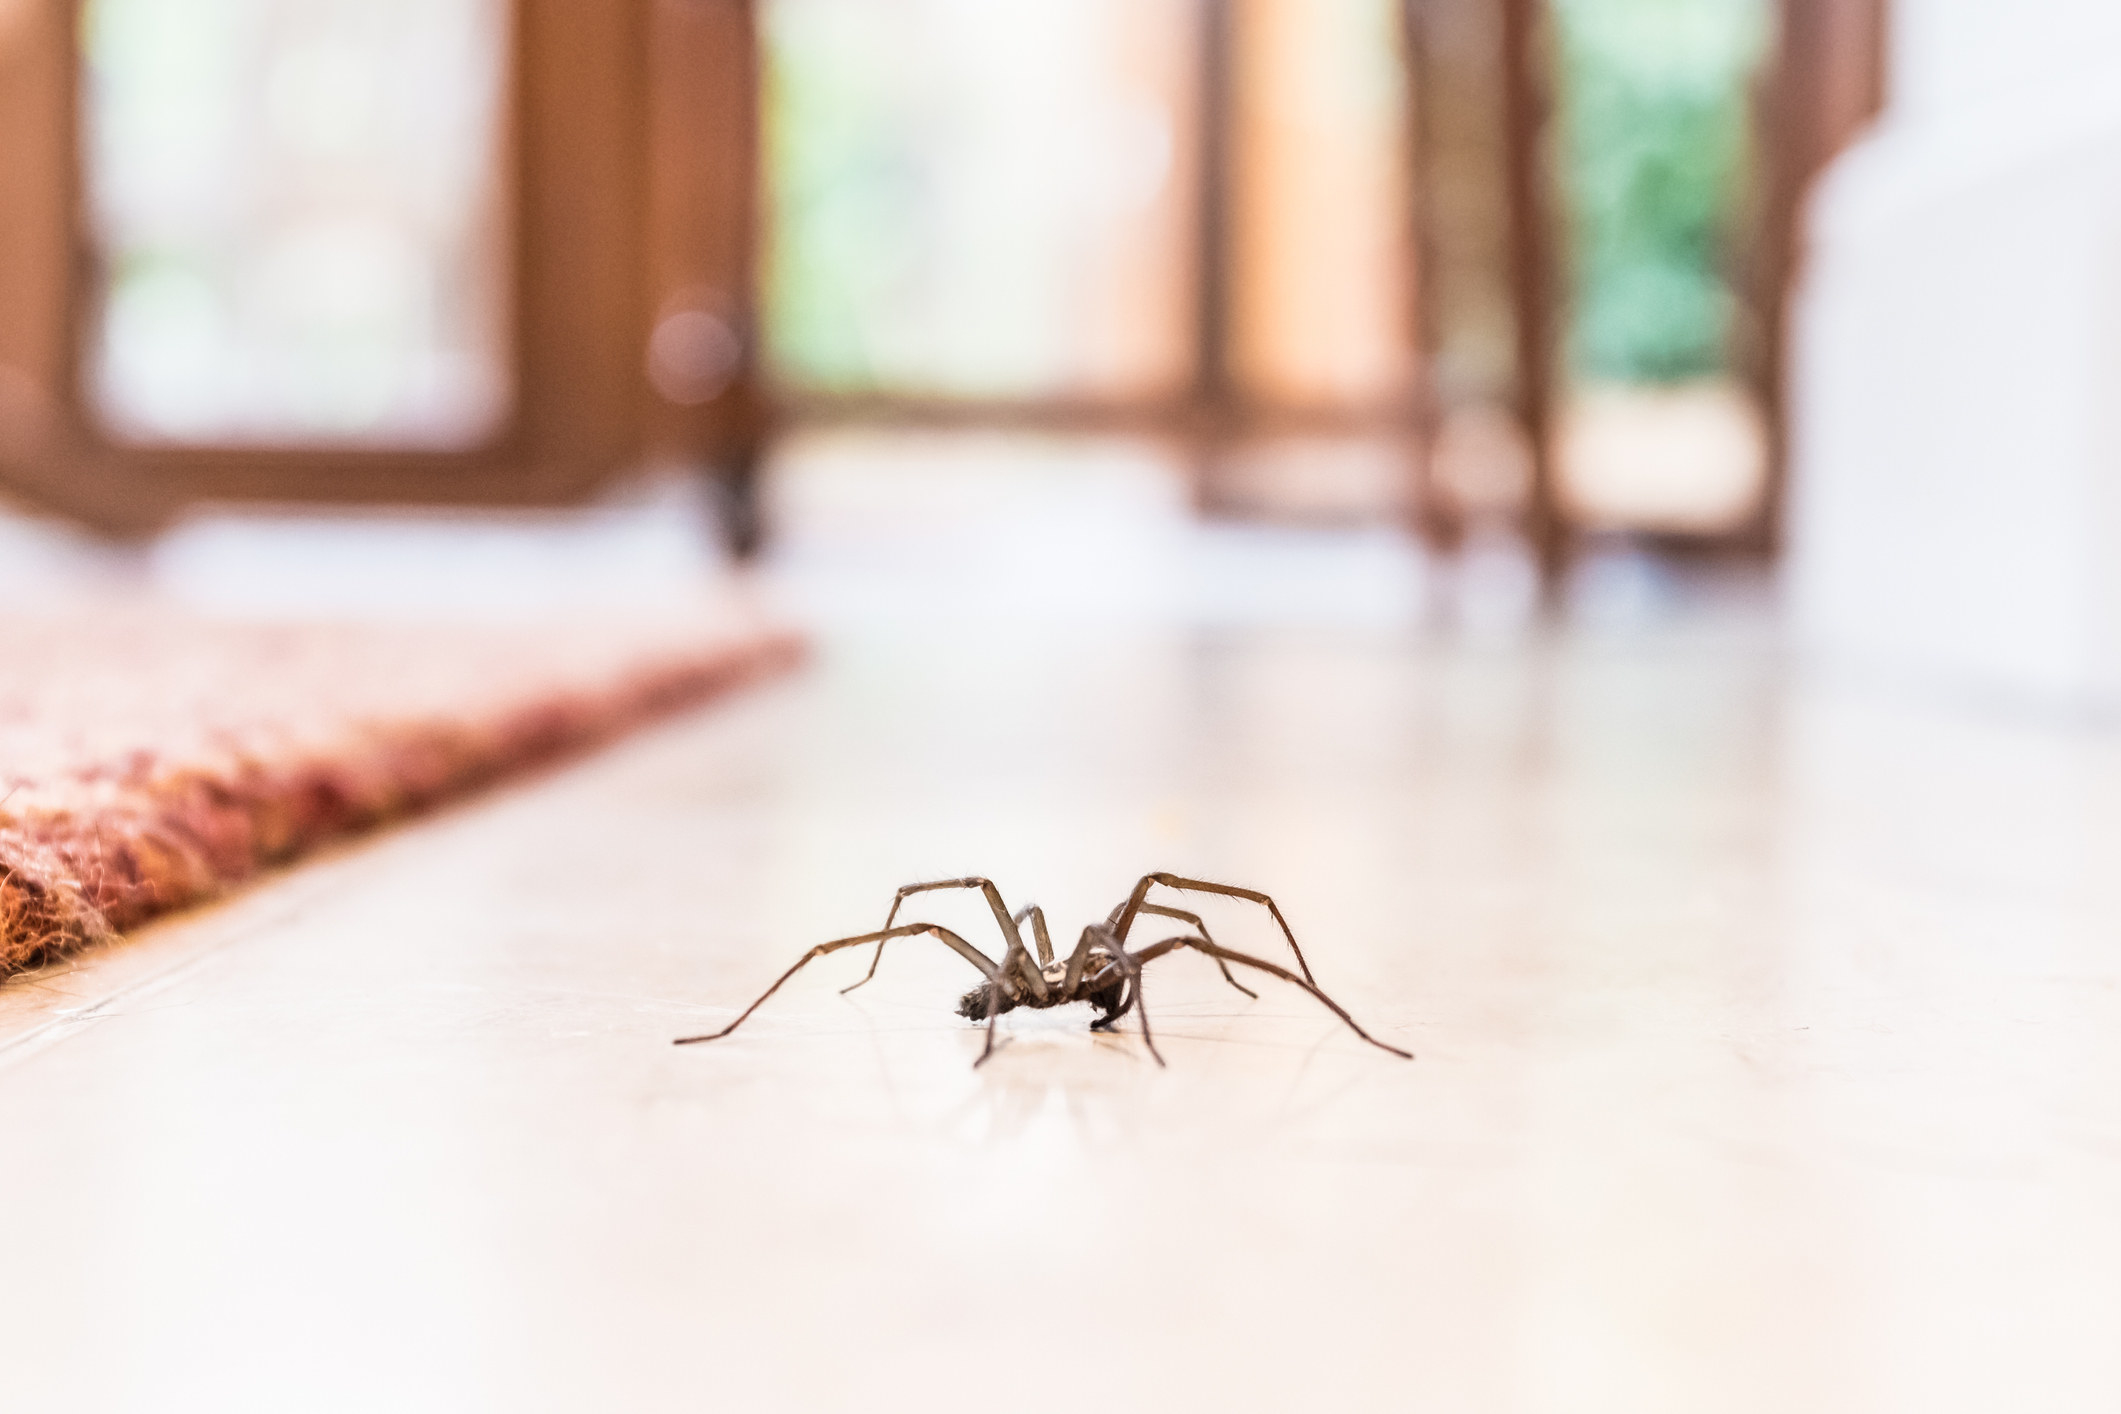 A spider on the floor of a house